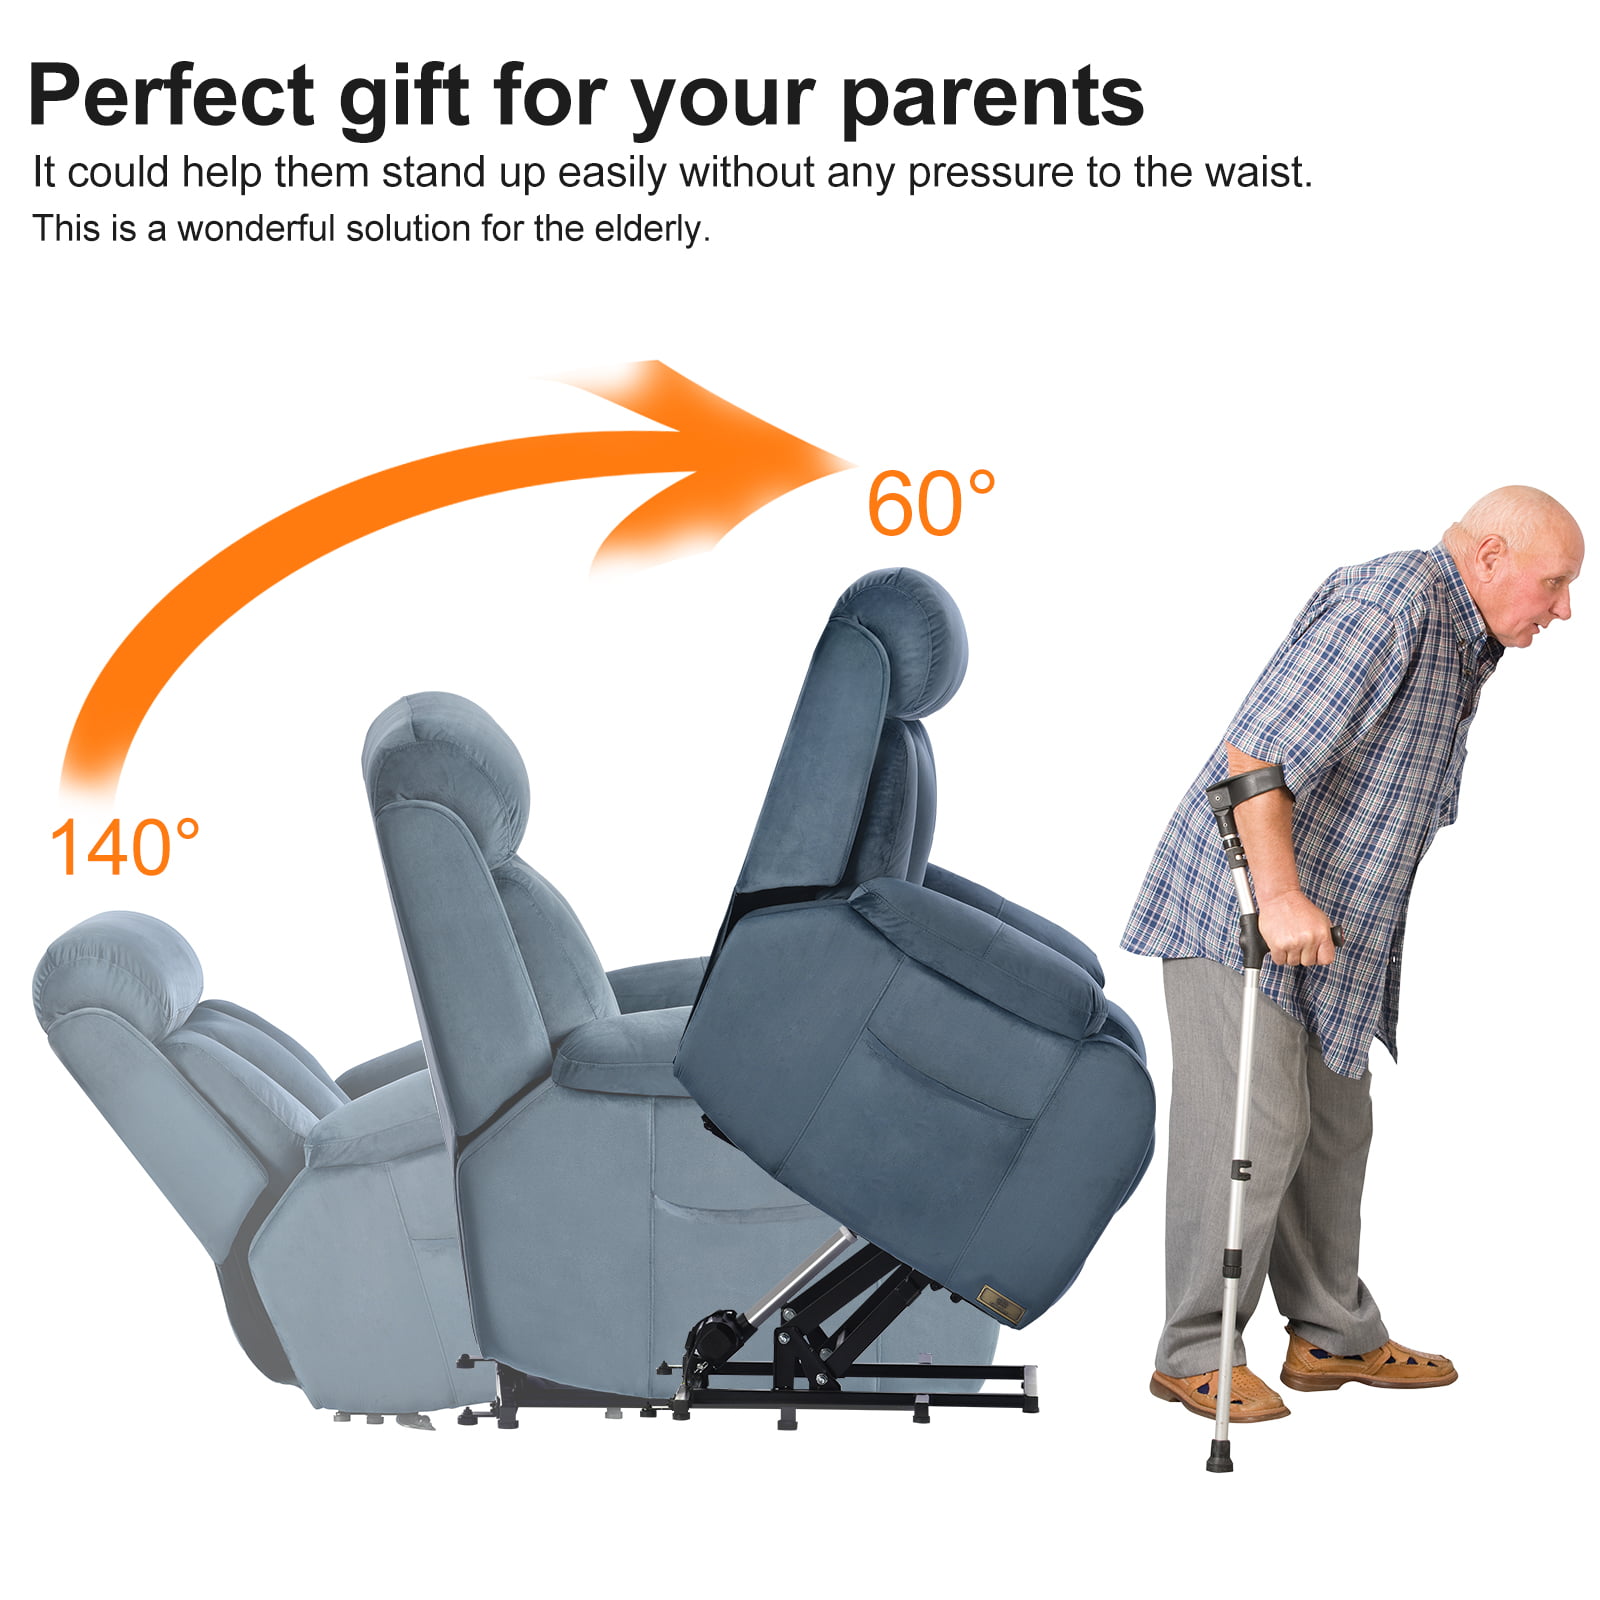 SLD Care Powered Lift Cushion Help get up and sit Down Slowly - Portable  and Safe Mobility Aid for Muscle Disease Knees Weak Elderly Malaise  Powerless